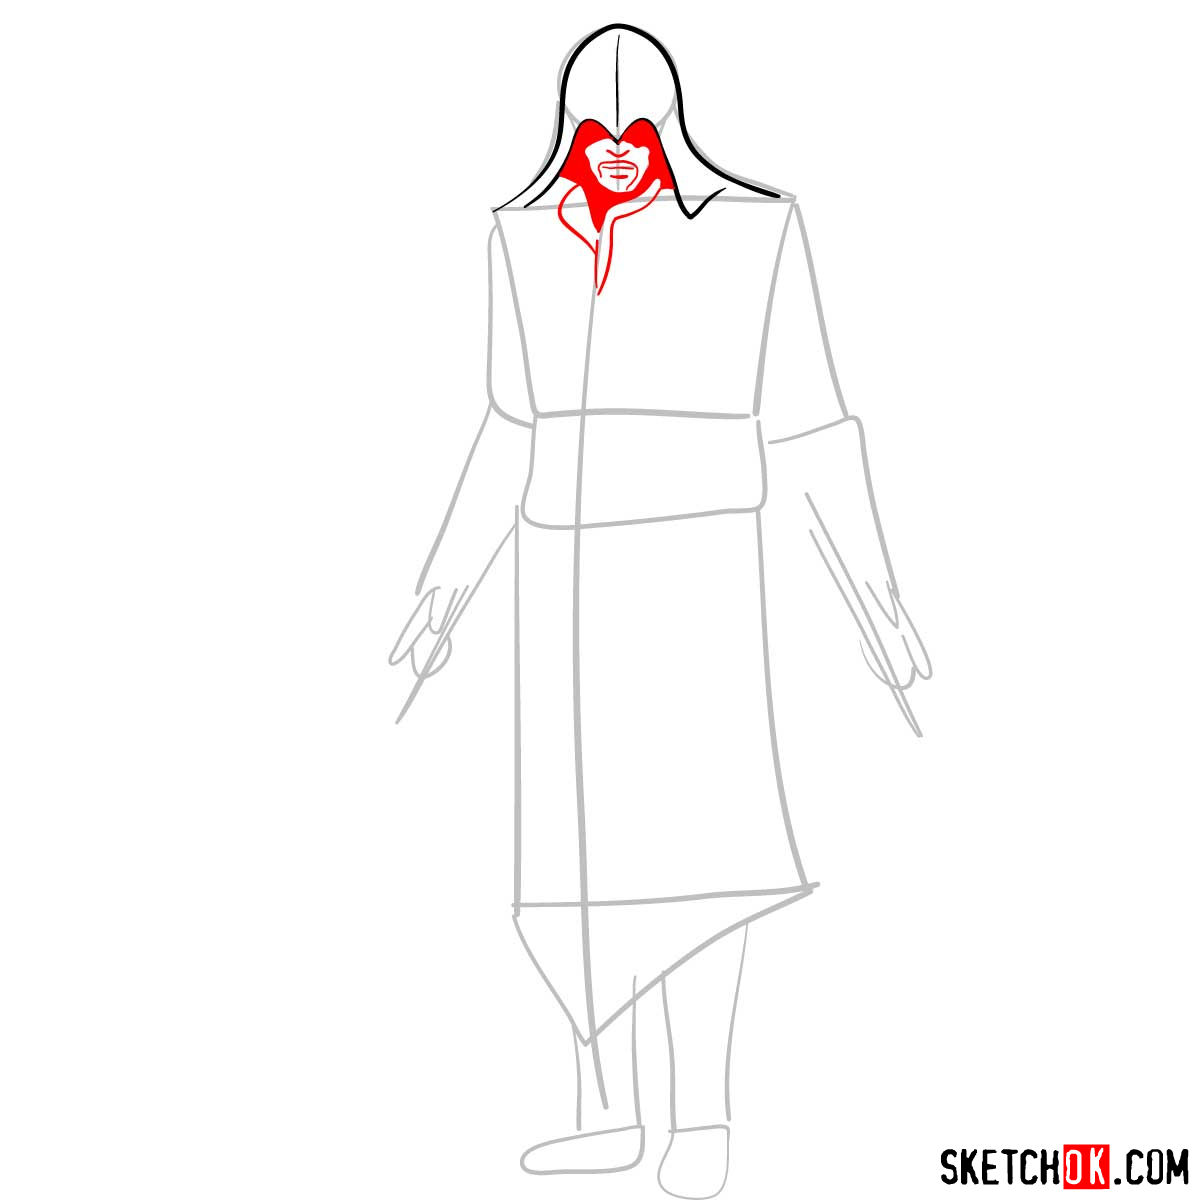 How to draw an Assassin from Assassin's Creed game - step 04